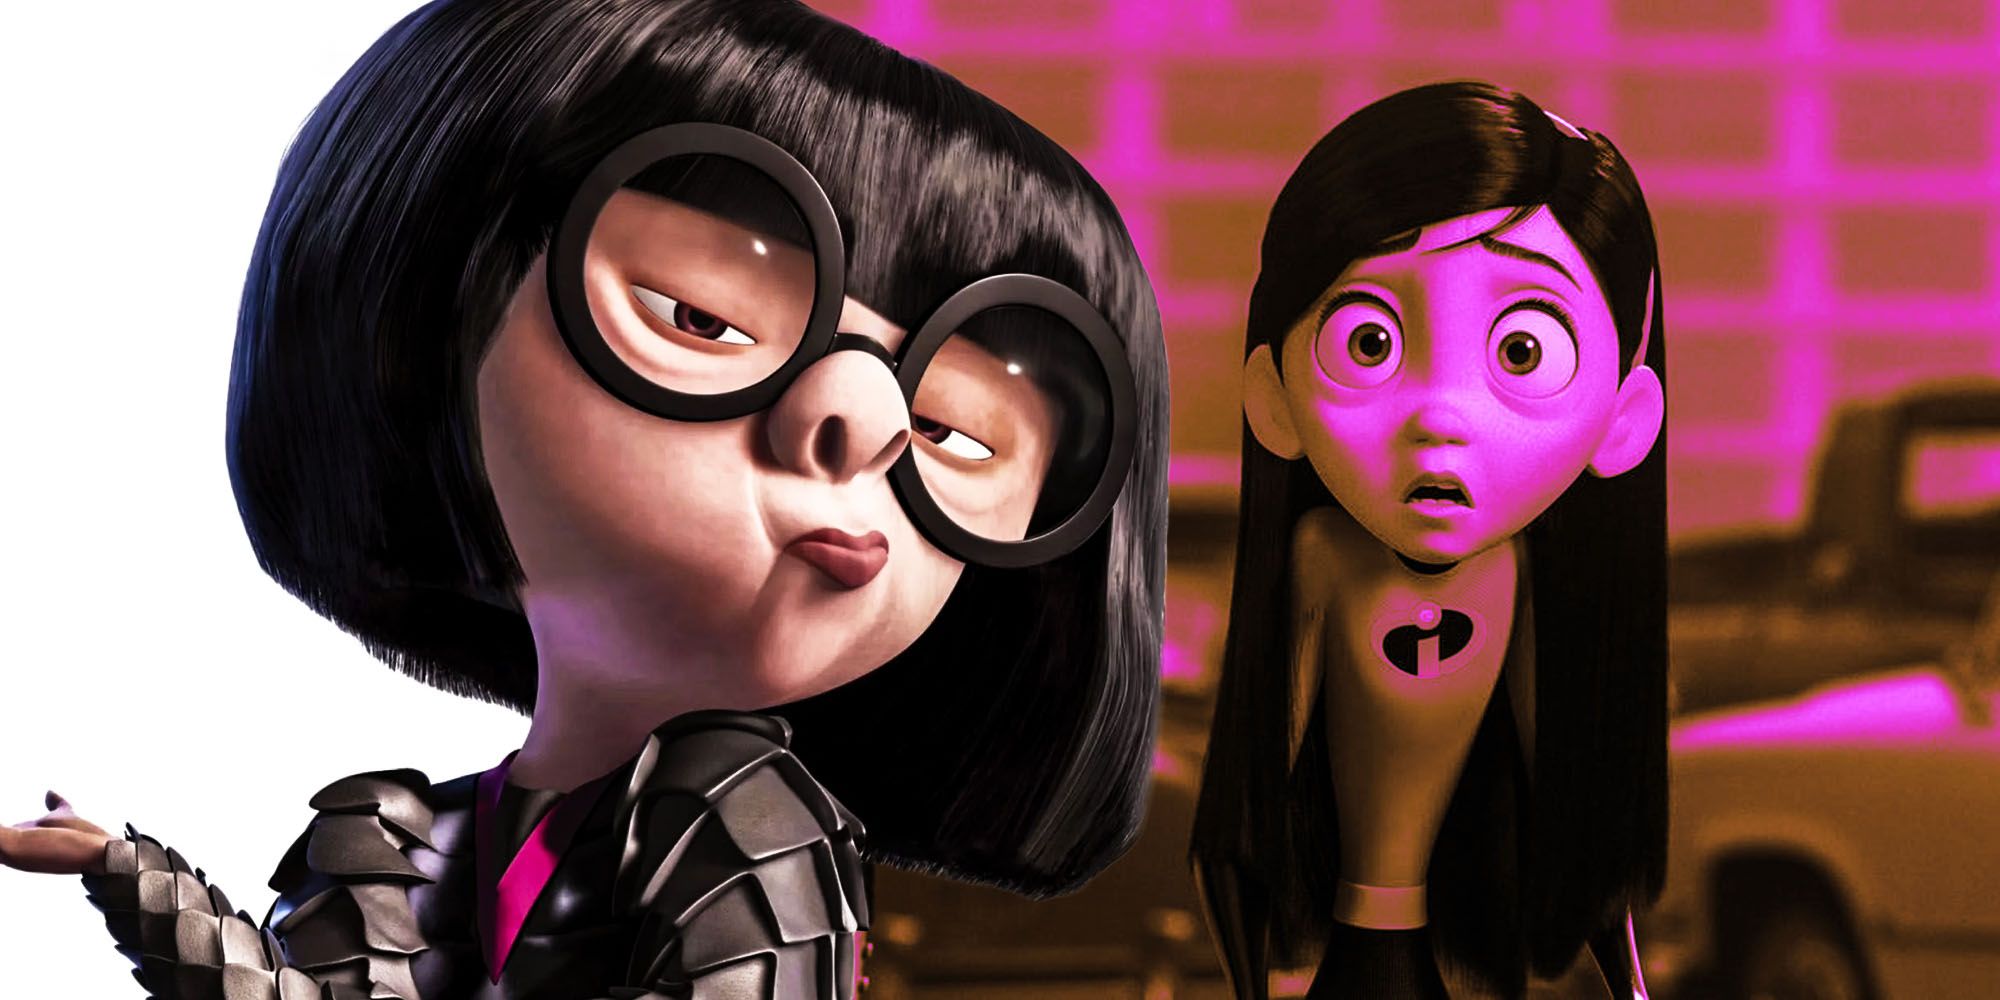 brian tingey recommends images of violet from the incredibles pic